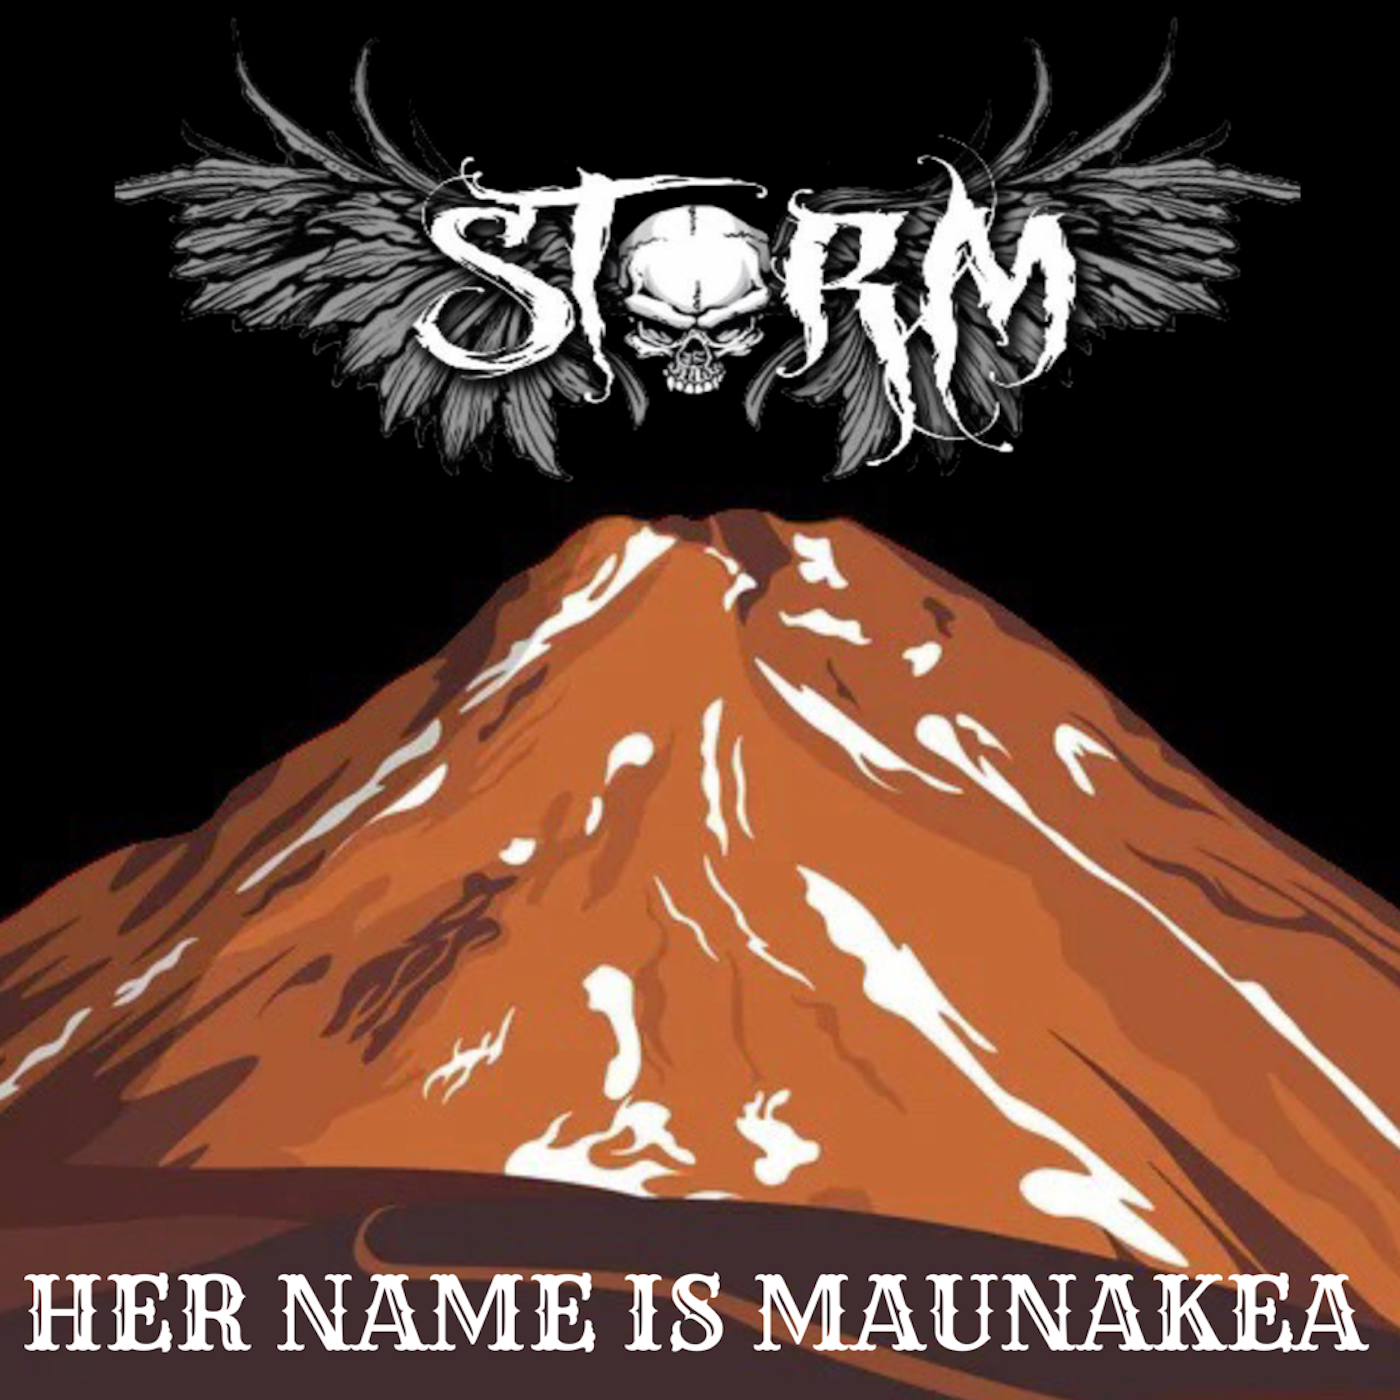 Art for Her Name Is Maunakea by Storm